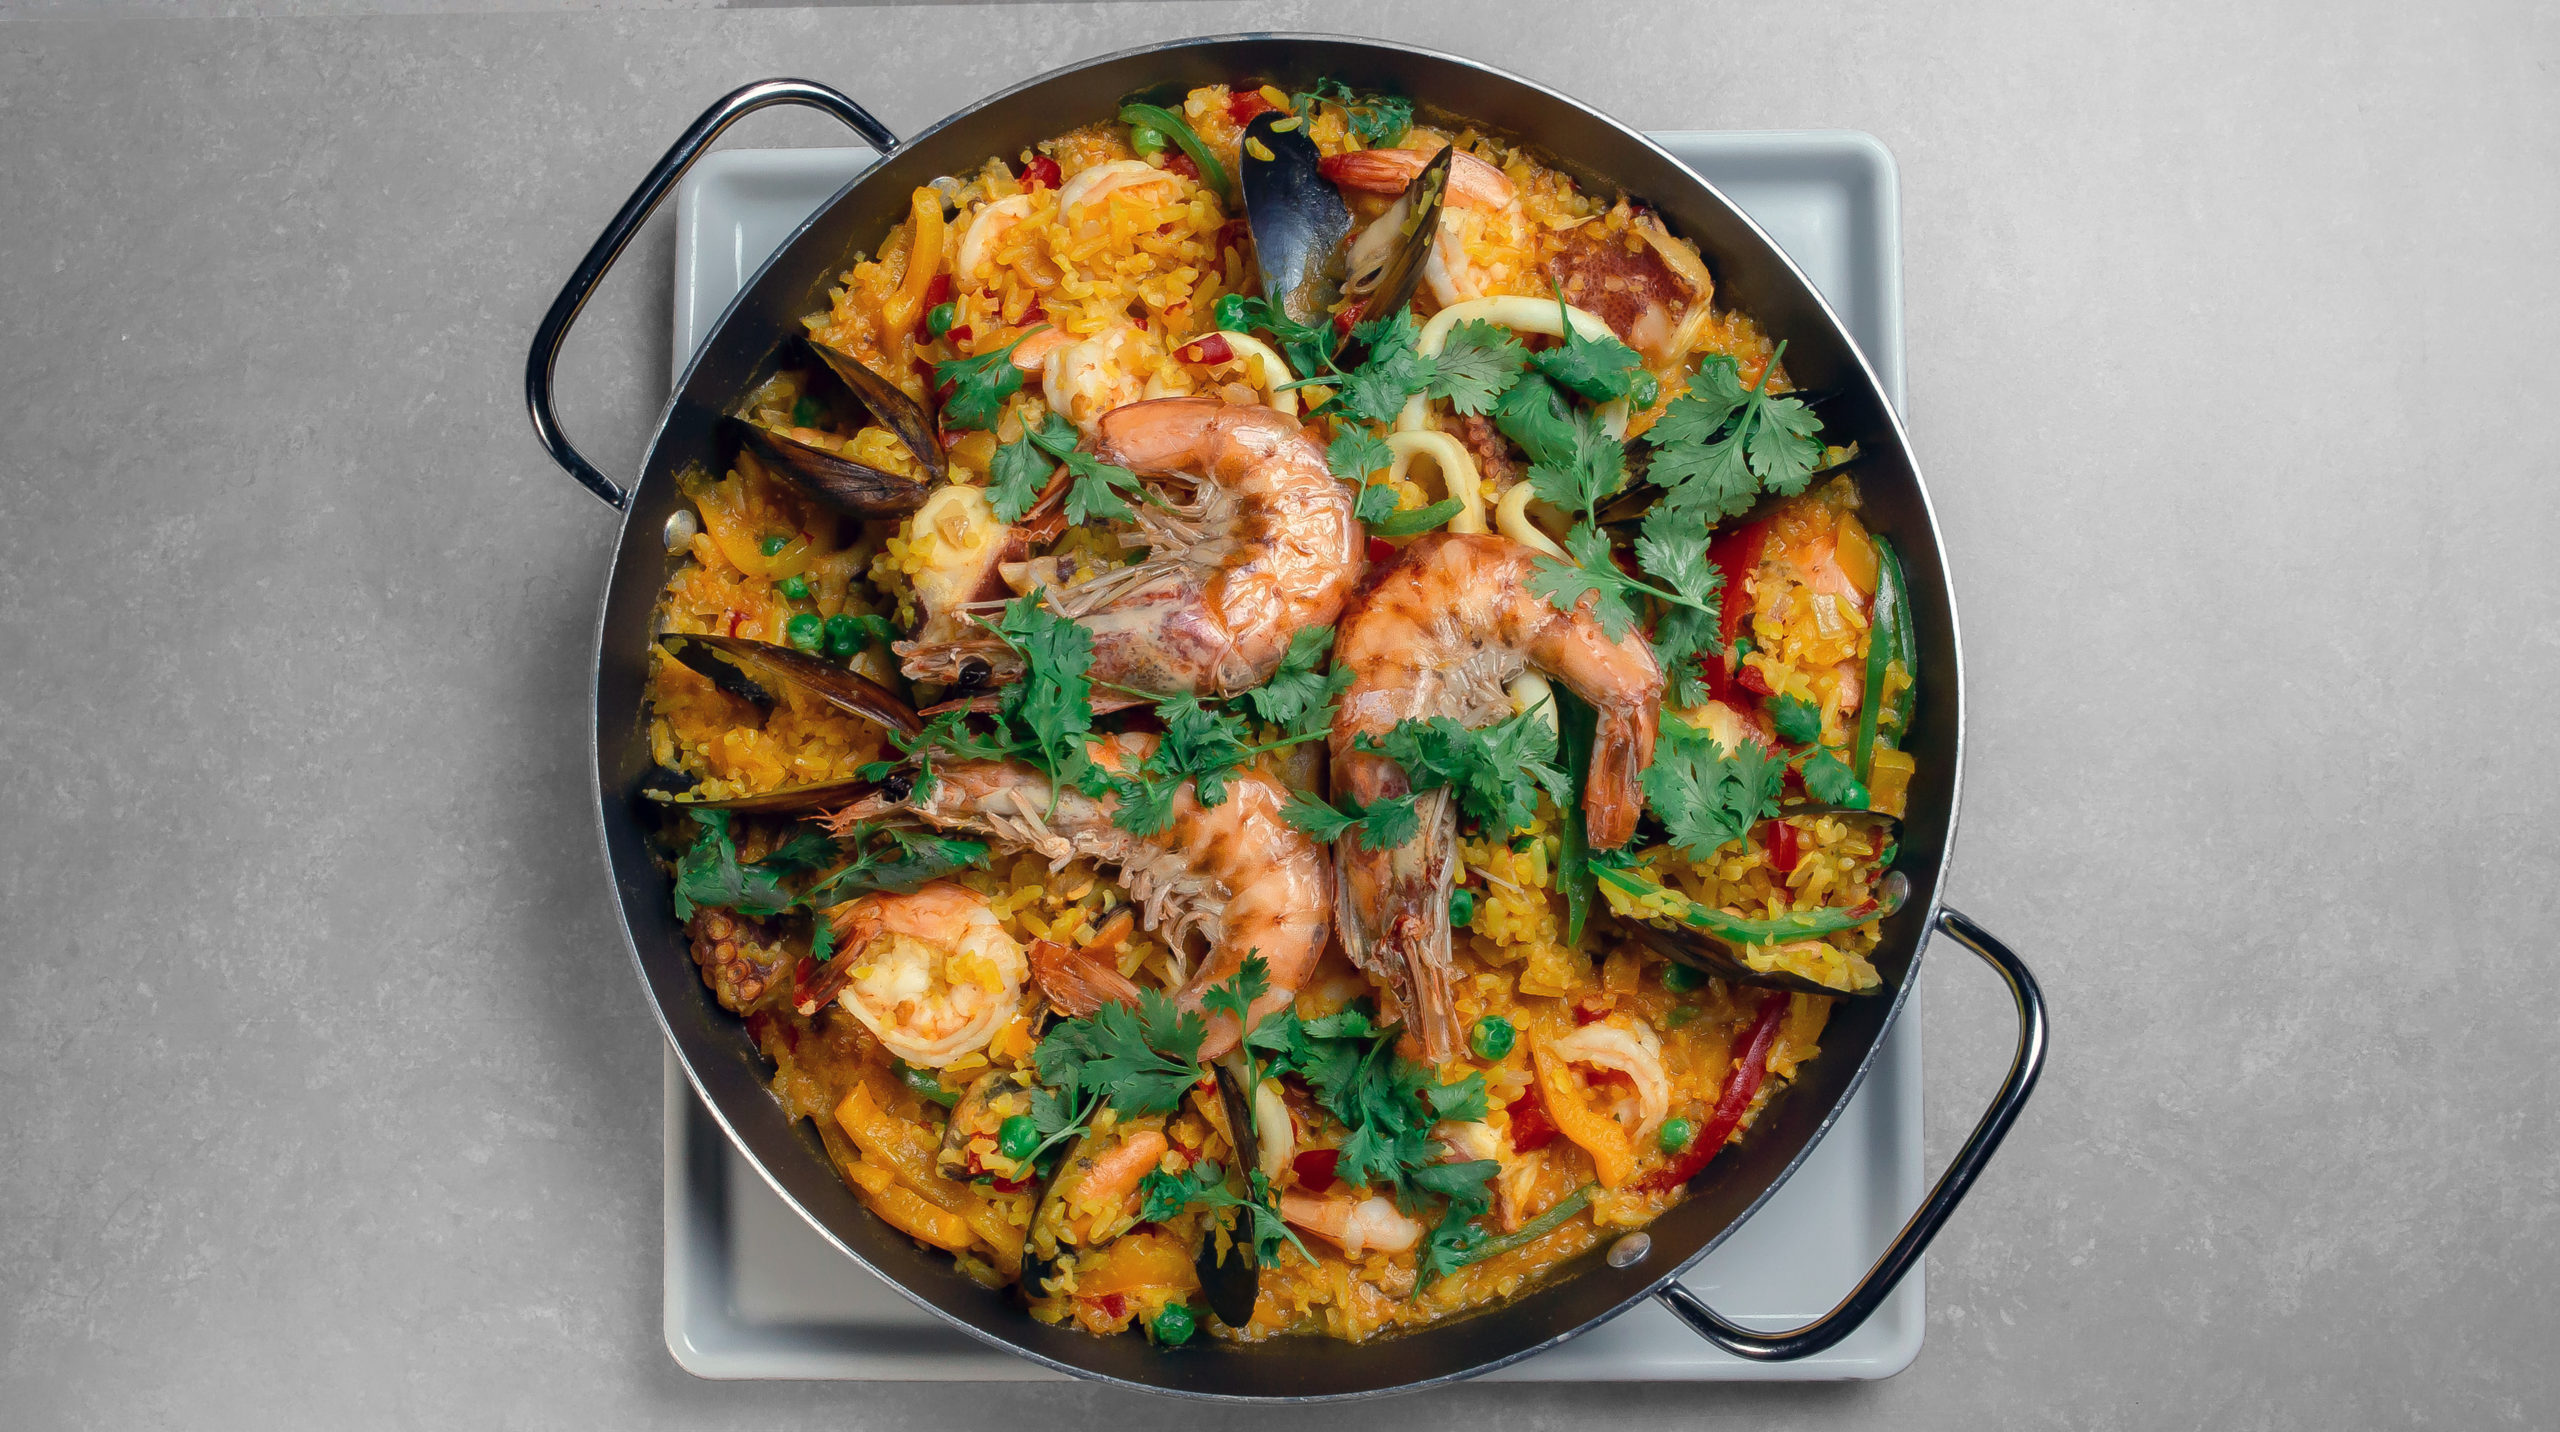 Seafood paella in a pan with shrimp, mussels, spanish rice, parsley and lemon on a plate.